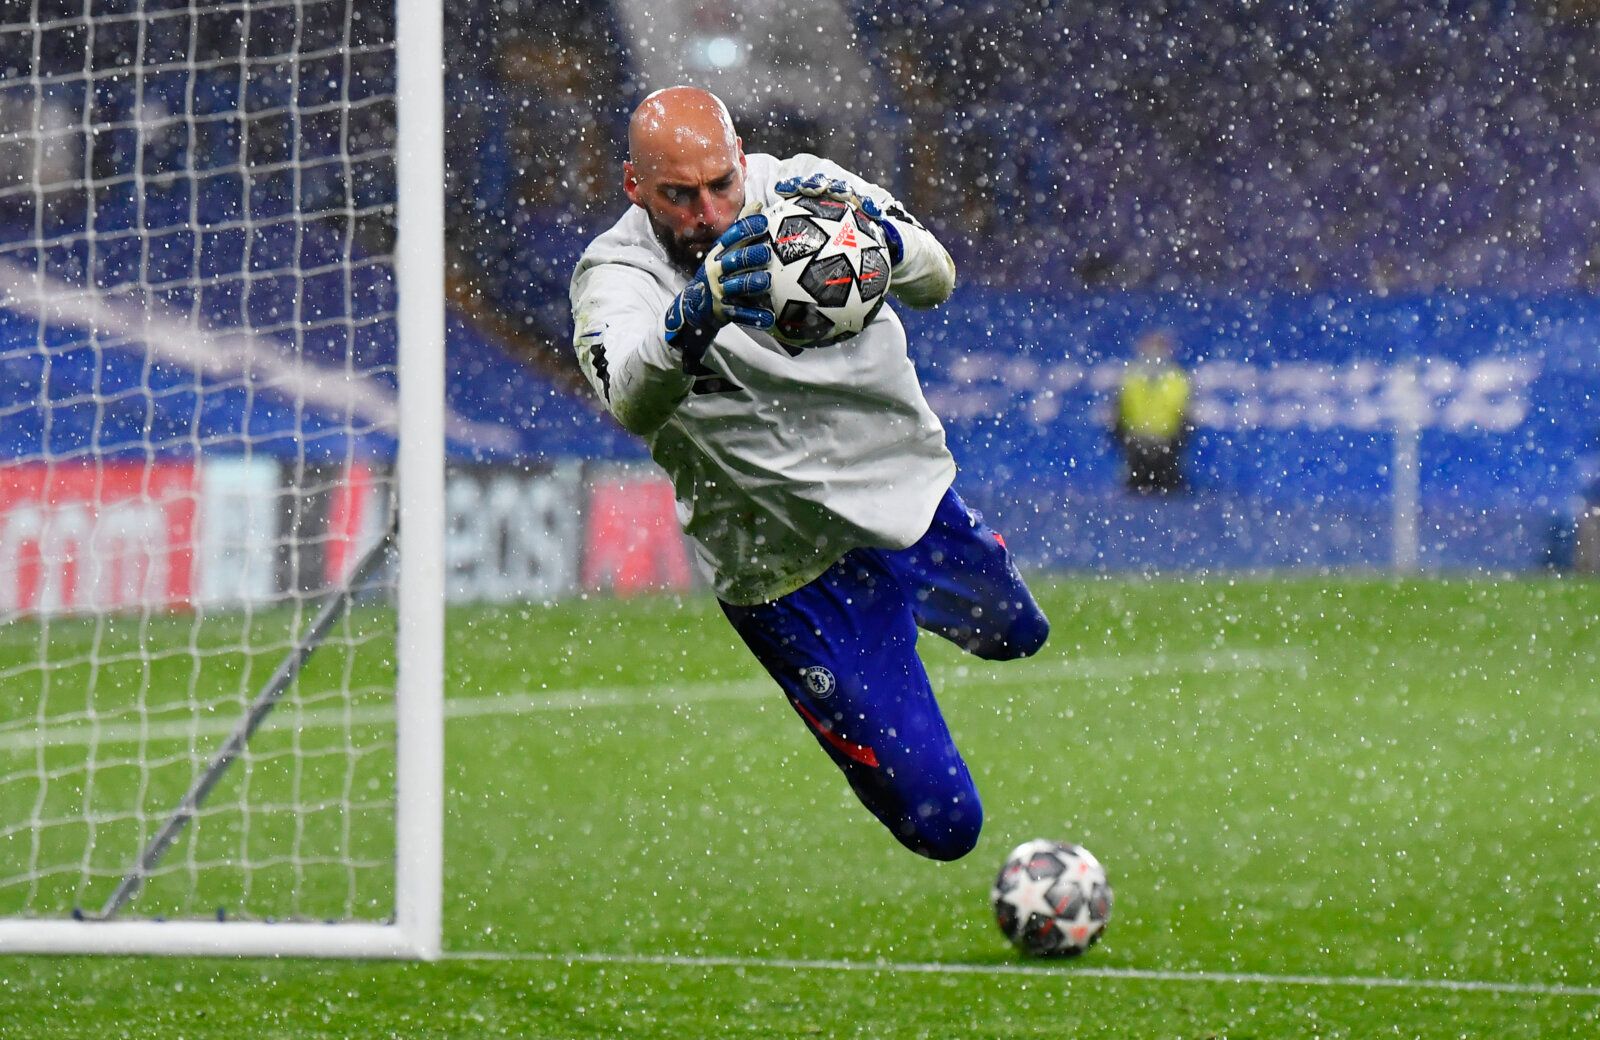 Soccer Football - Champions League - Semi Final Second Leg - Chelsea v Real Madrid - Stamford Bridge, London, Britain - May 5, 2021 Chelsea's Willy Caballero during the warm up before the match REUTERS/Toby Melville